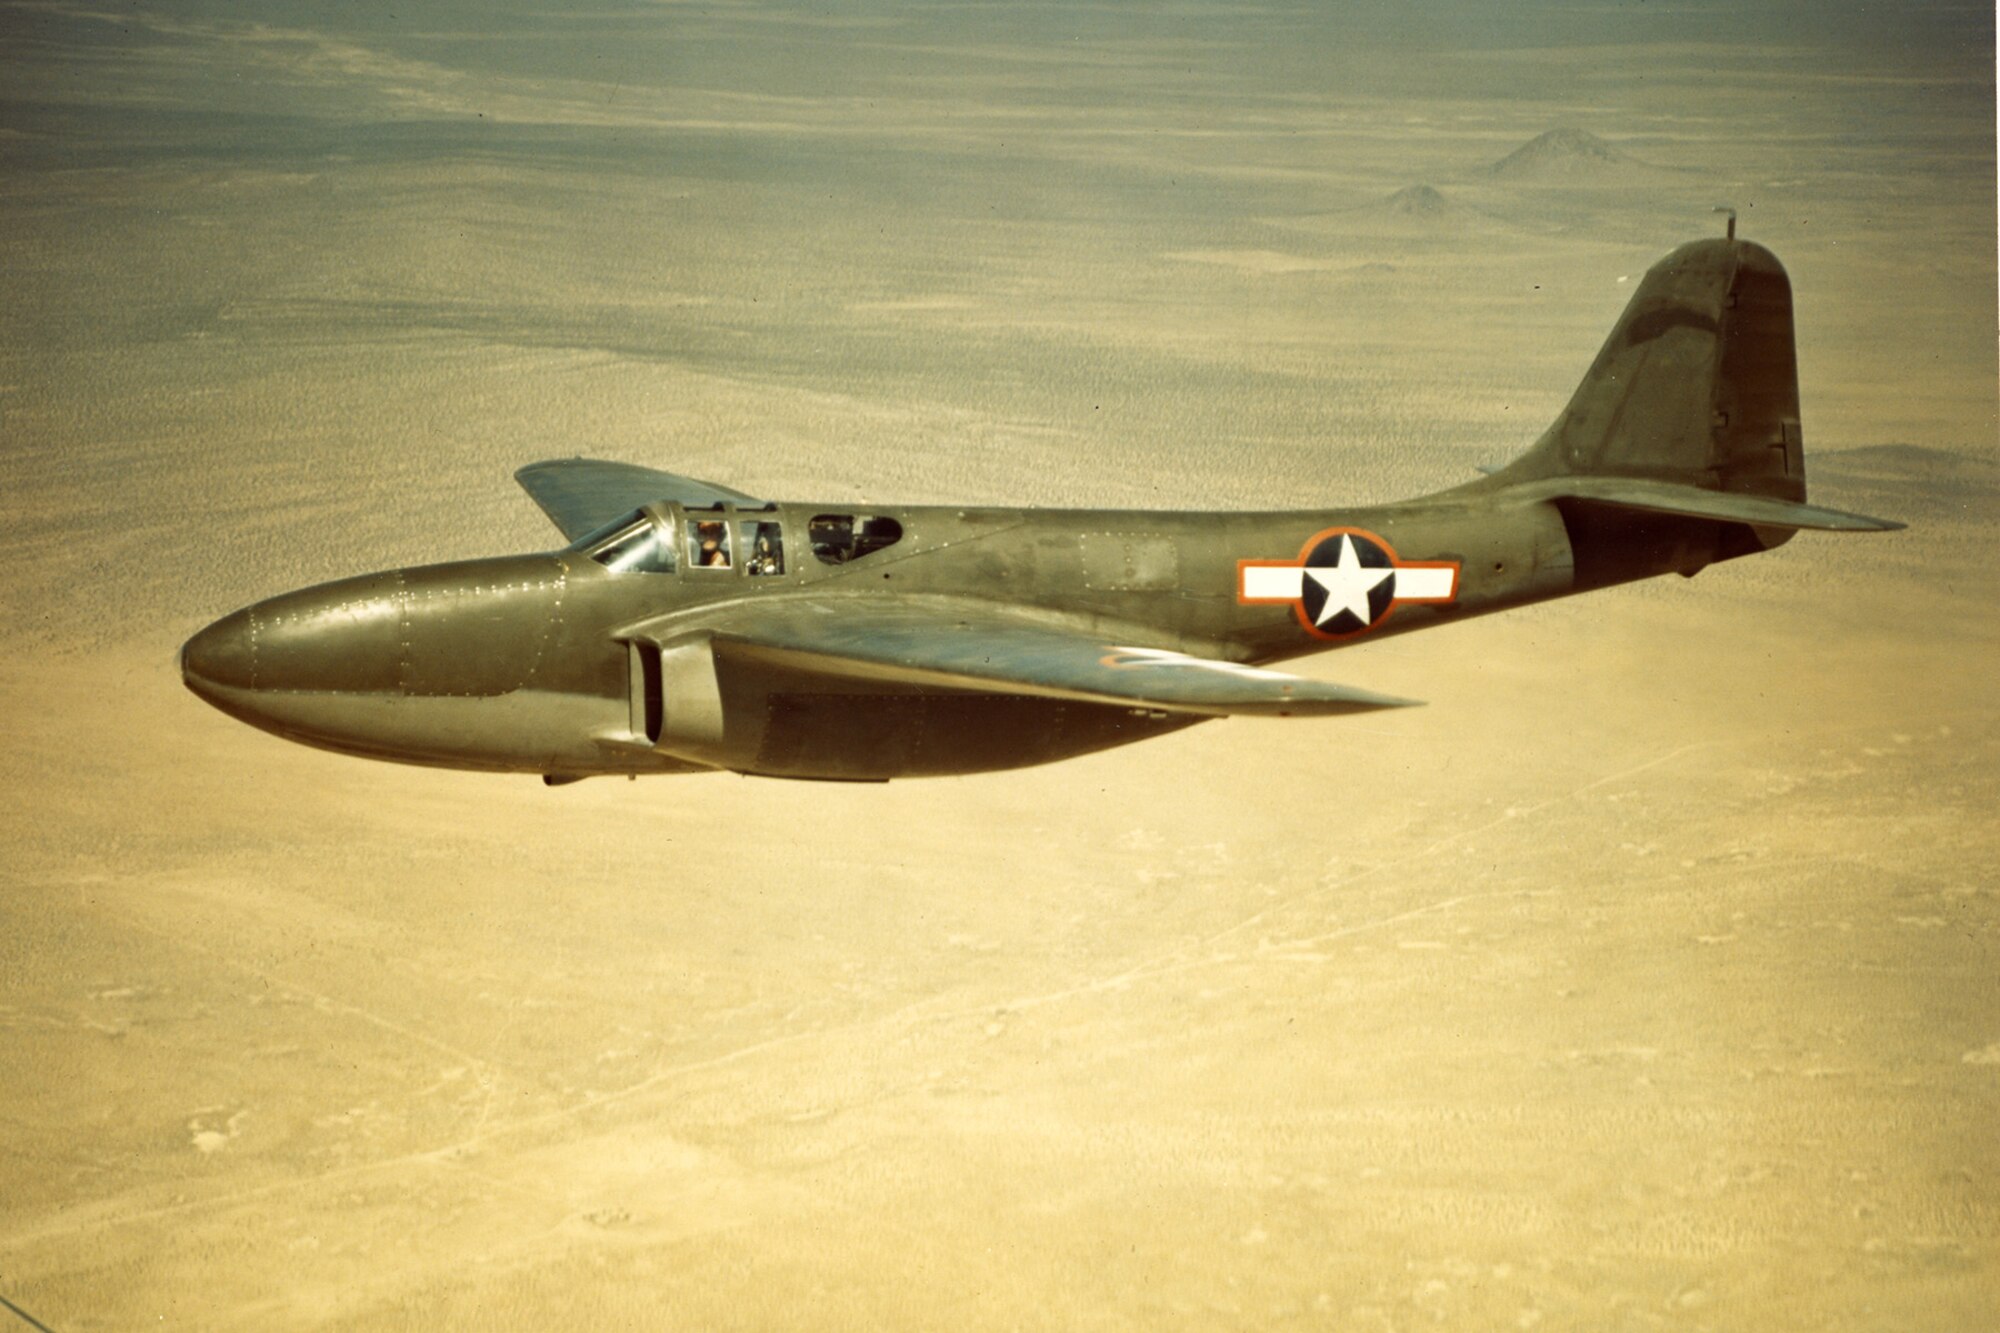 This is one of three XP-59A prototypes. The first prototype XP-59A flew in the fall of 1942 at Muroc Dry Lake (now Edwards Air Force Base), Calif. (U.S. Air Force photo)